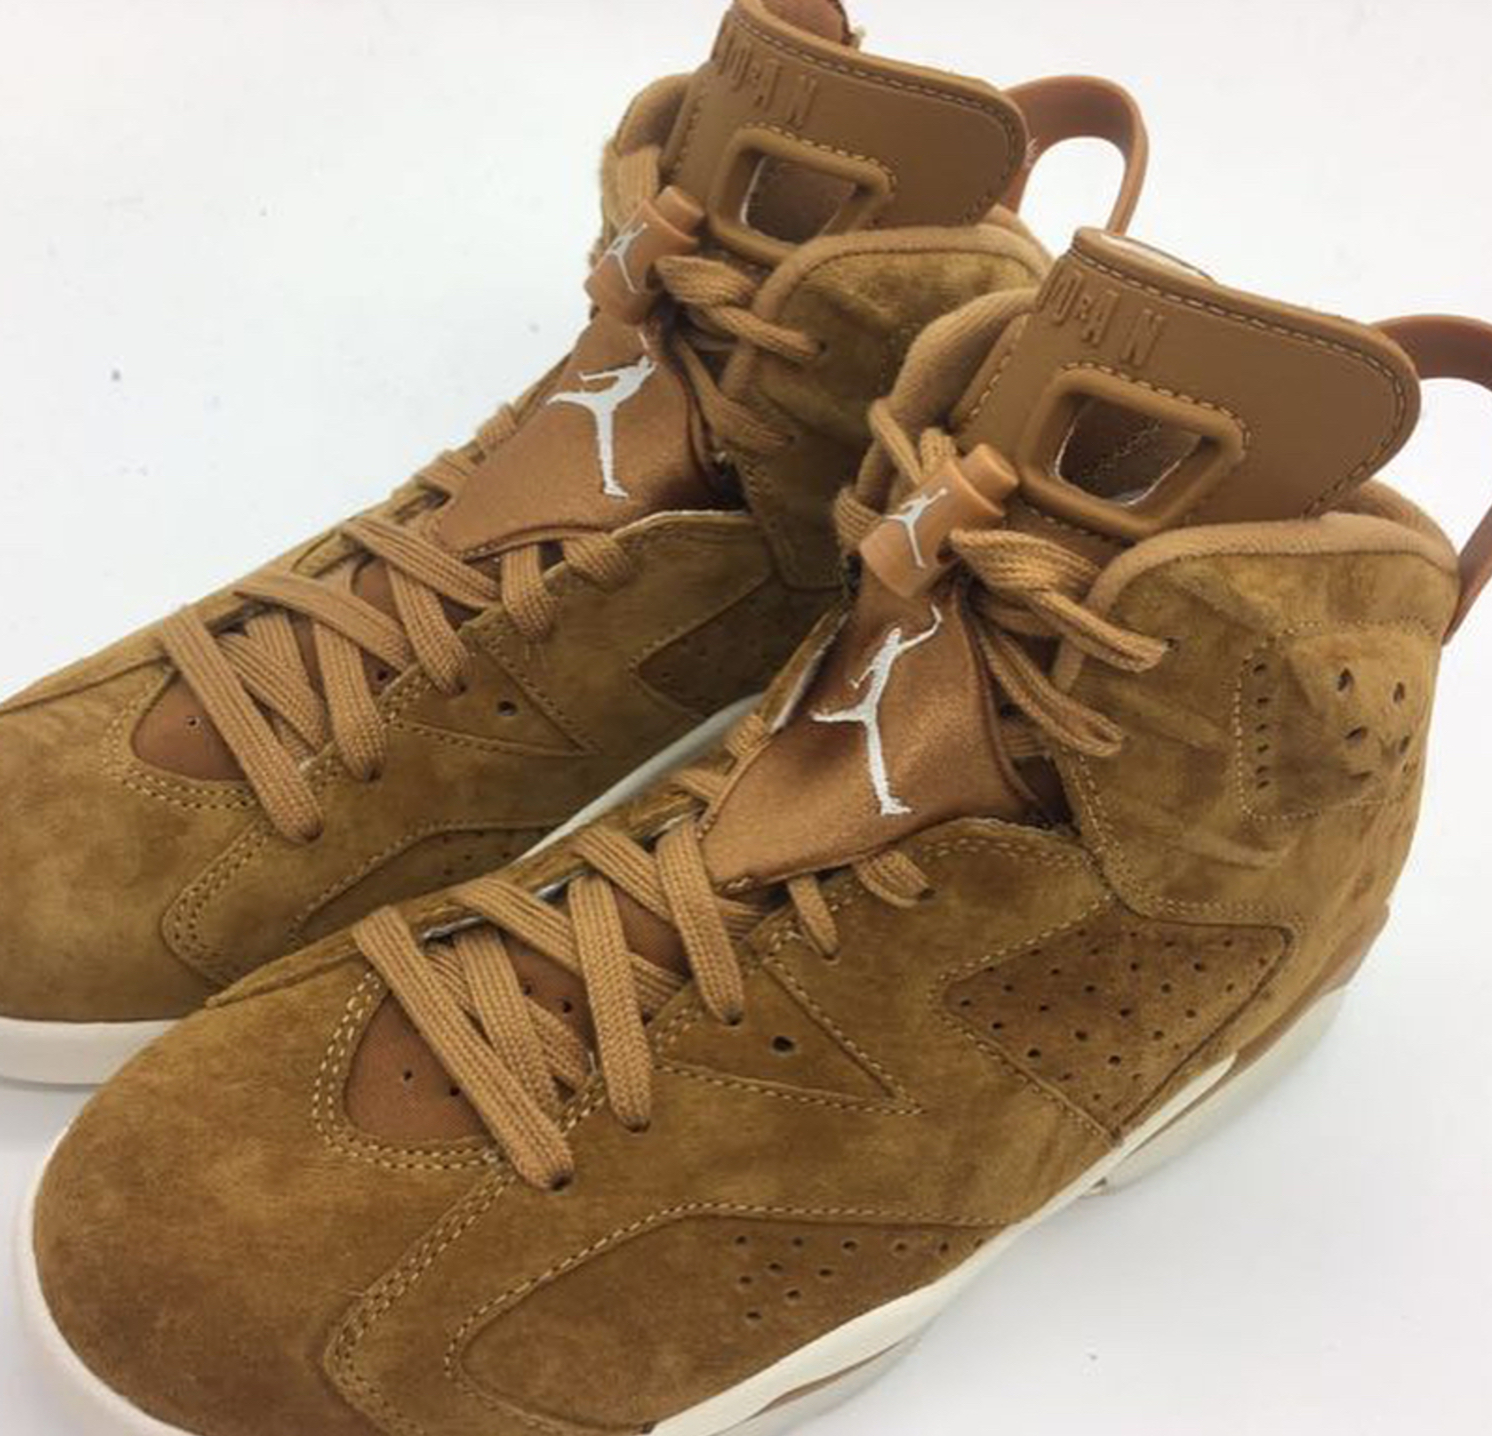 The Air Jordan 6 Surfaces in 'Golden Harvest' Suede - WearTesters